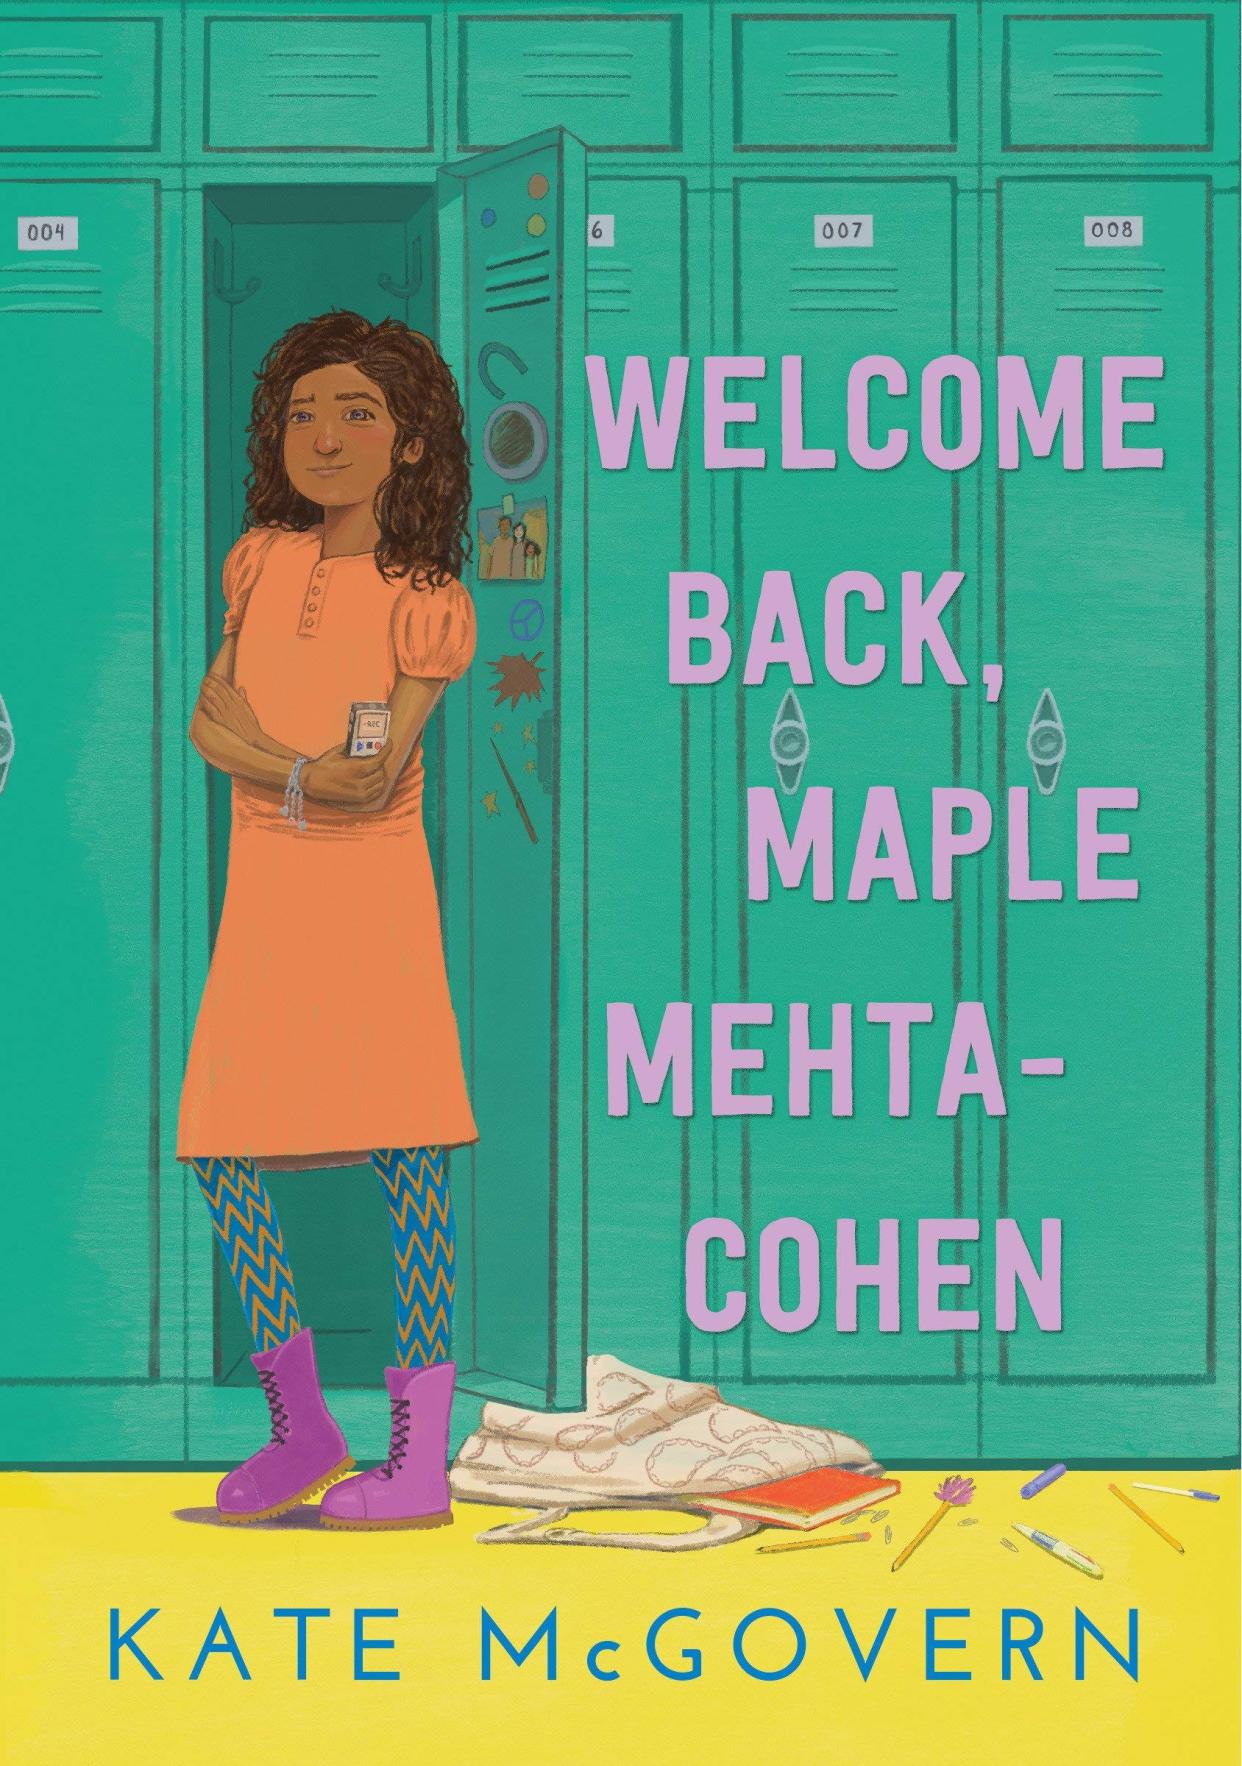 "Welcome Back, Maple Mehta-Cohen" by Kate McGovern